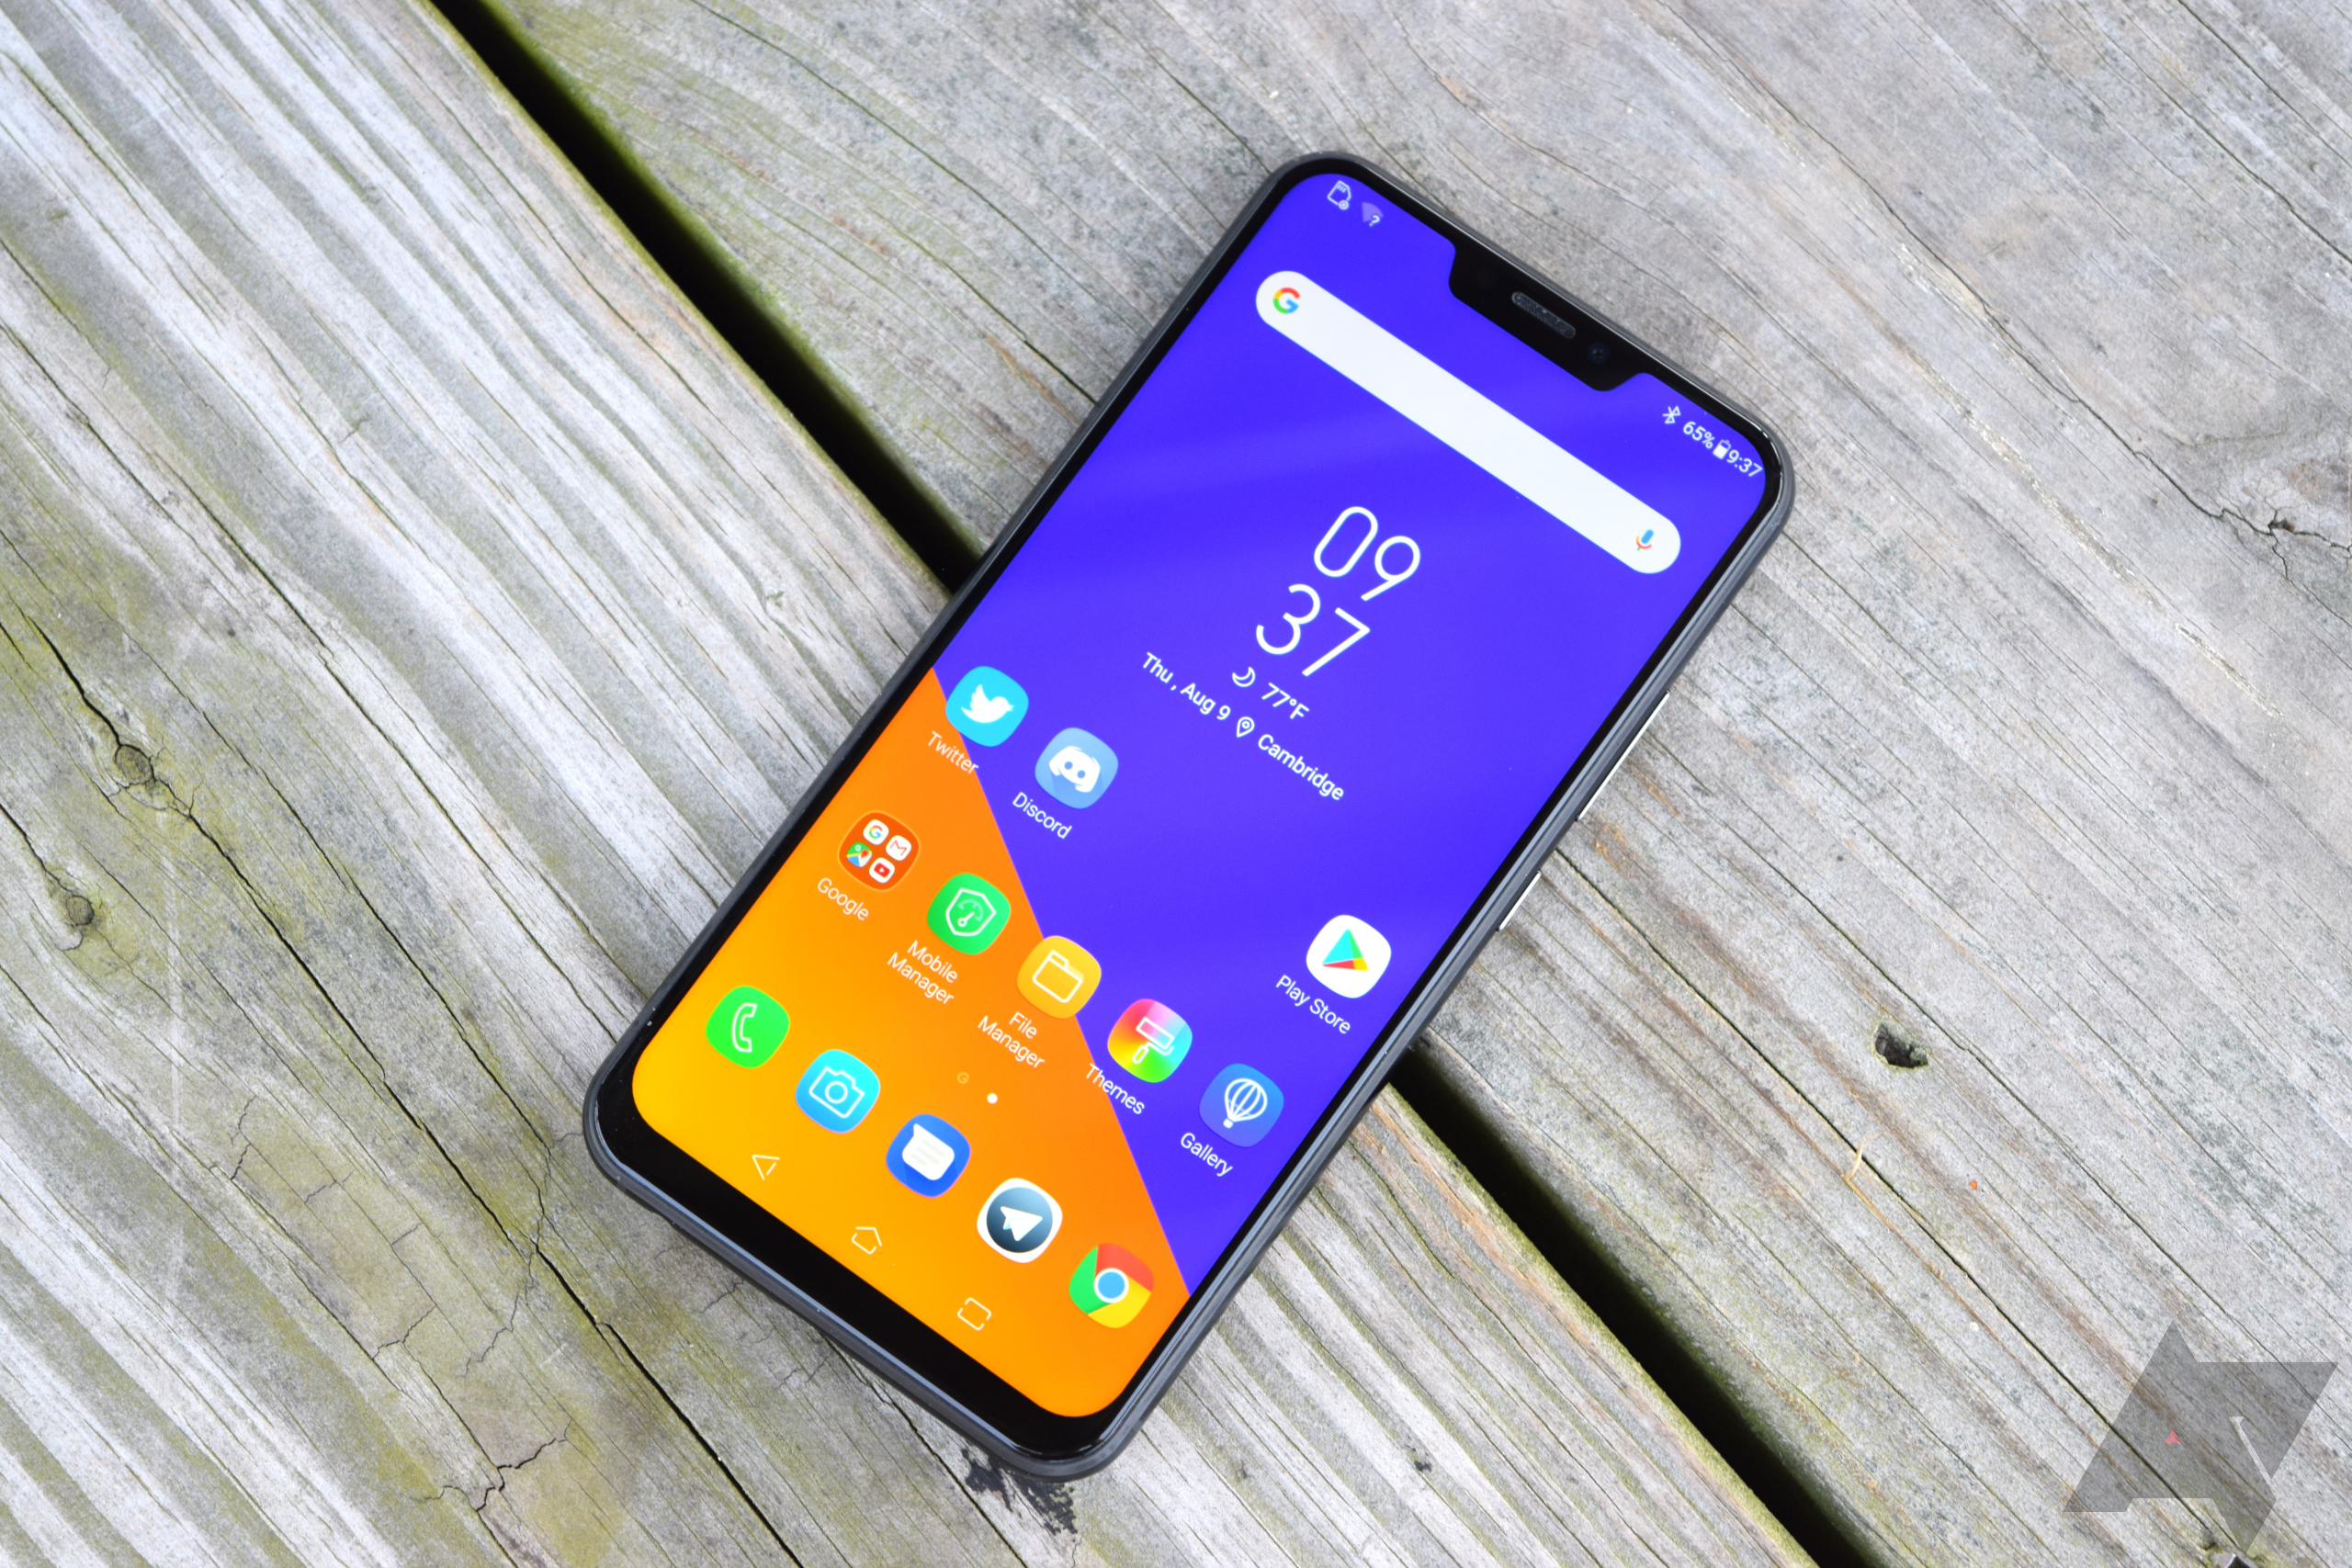 Asus Zenfone 5Z review: As good as it is, buy a OnePlus 6 instead